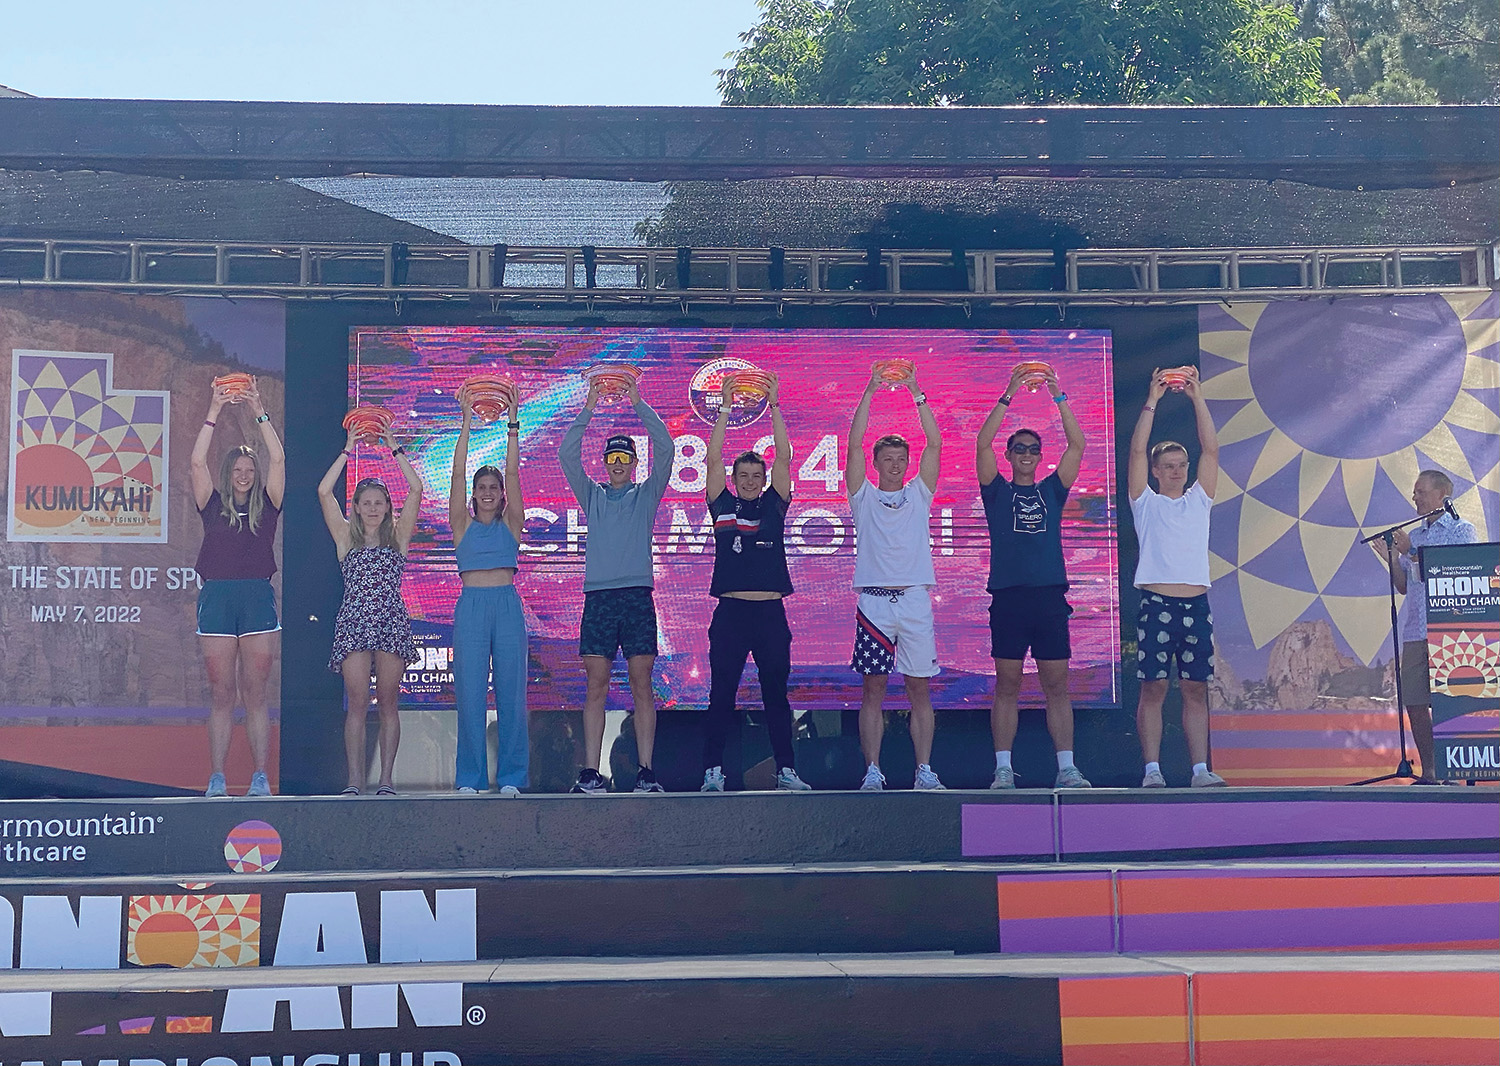 Out of the top five for Men’s 18-24 Triathlon at the Ironman World Championship, (middle-left) Plewes placed first place. Left: Top three females for Women’s 18-24 Ironman triathlon race, and top five males for 18-24.